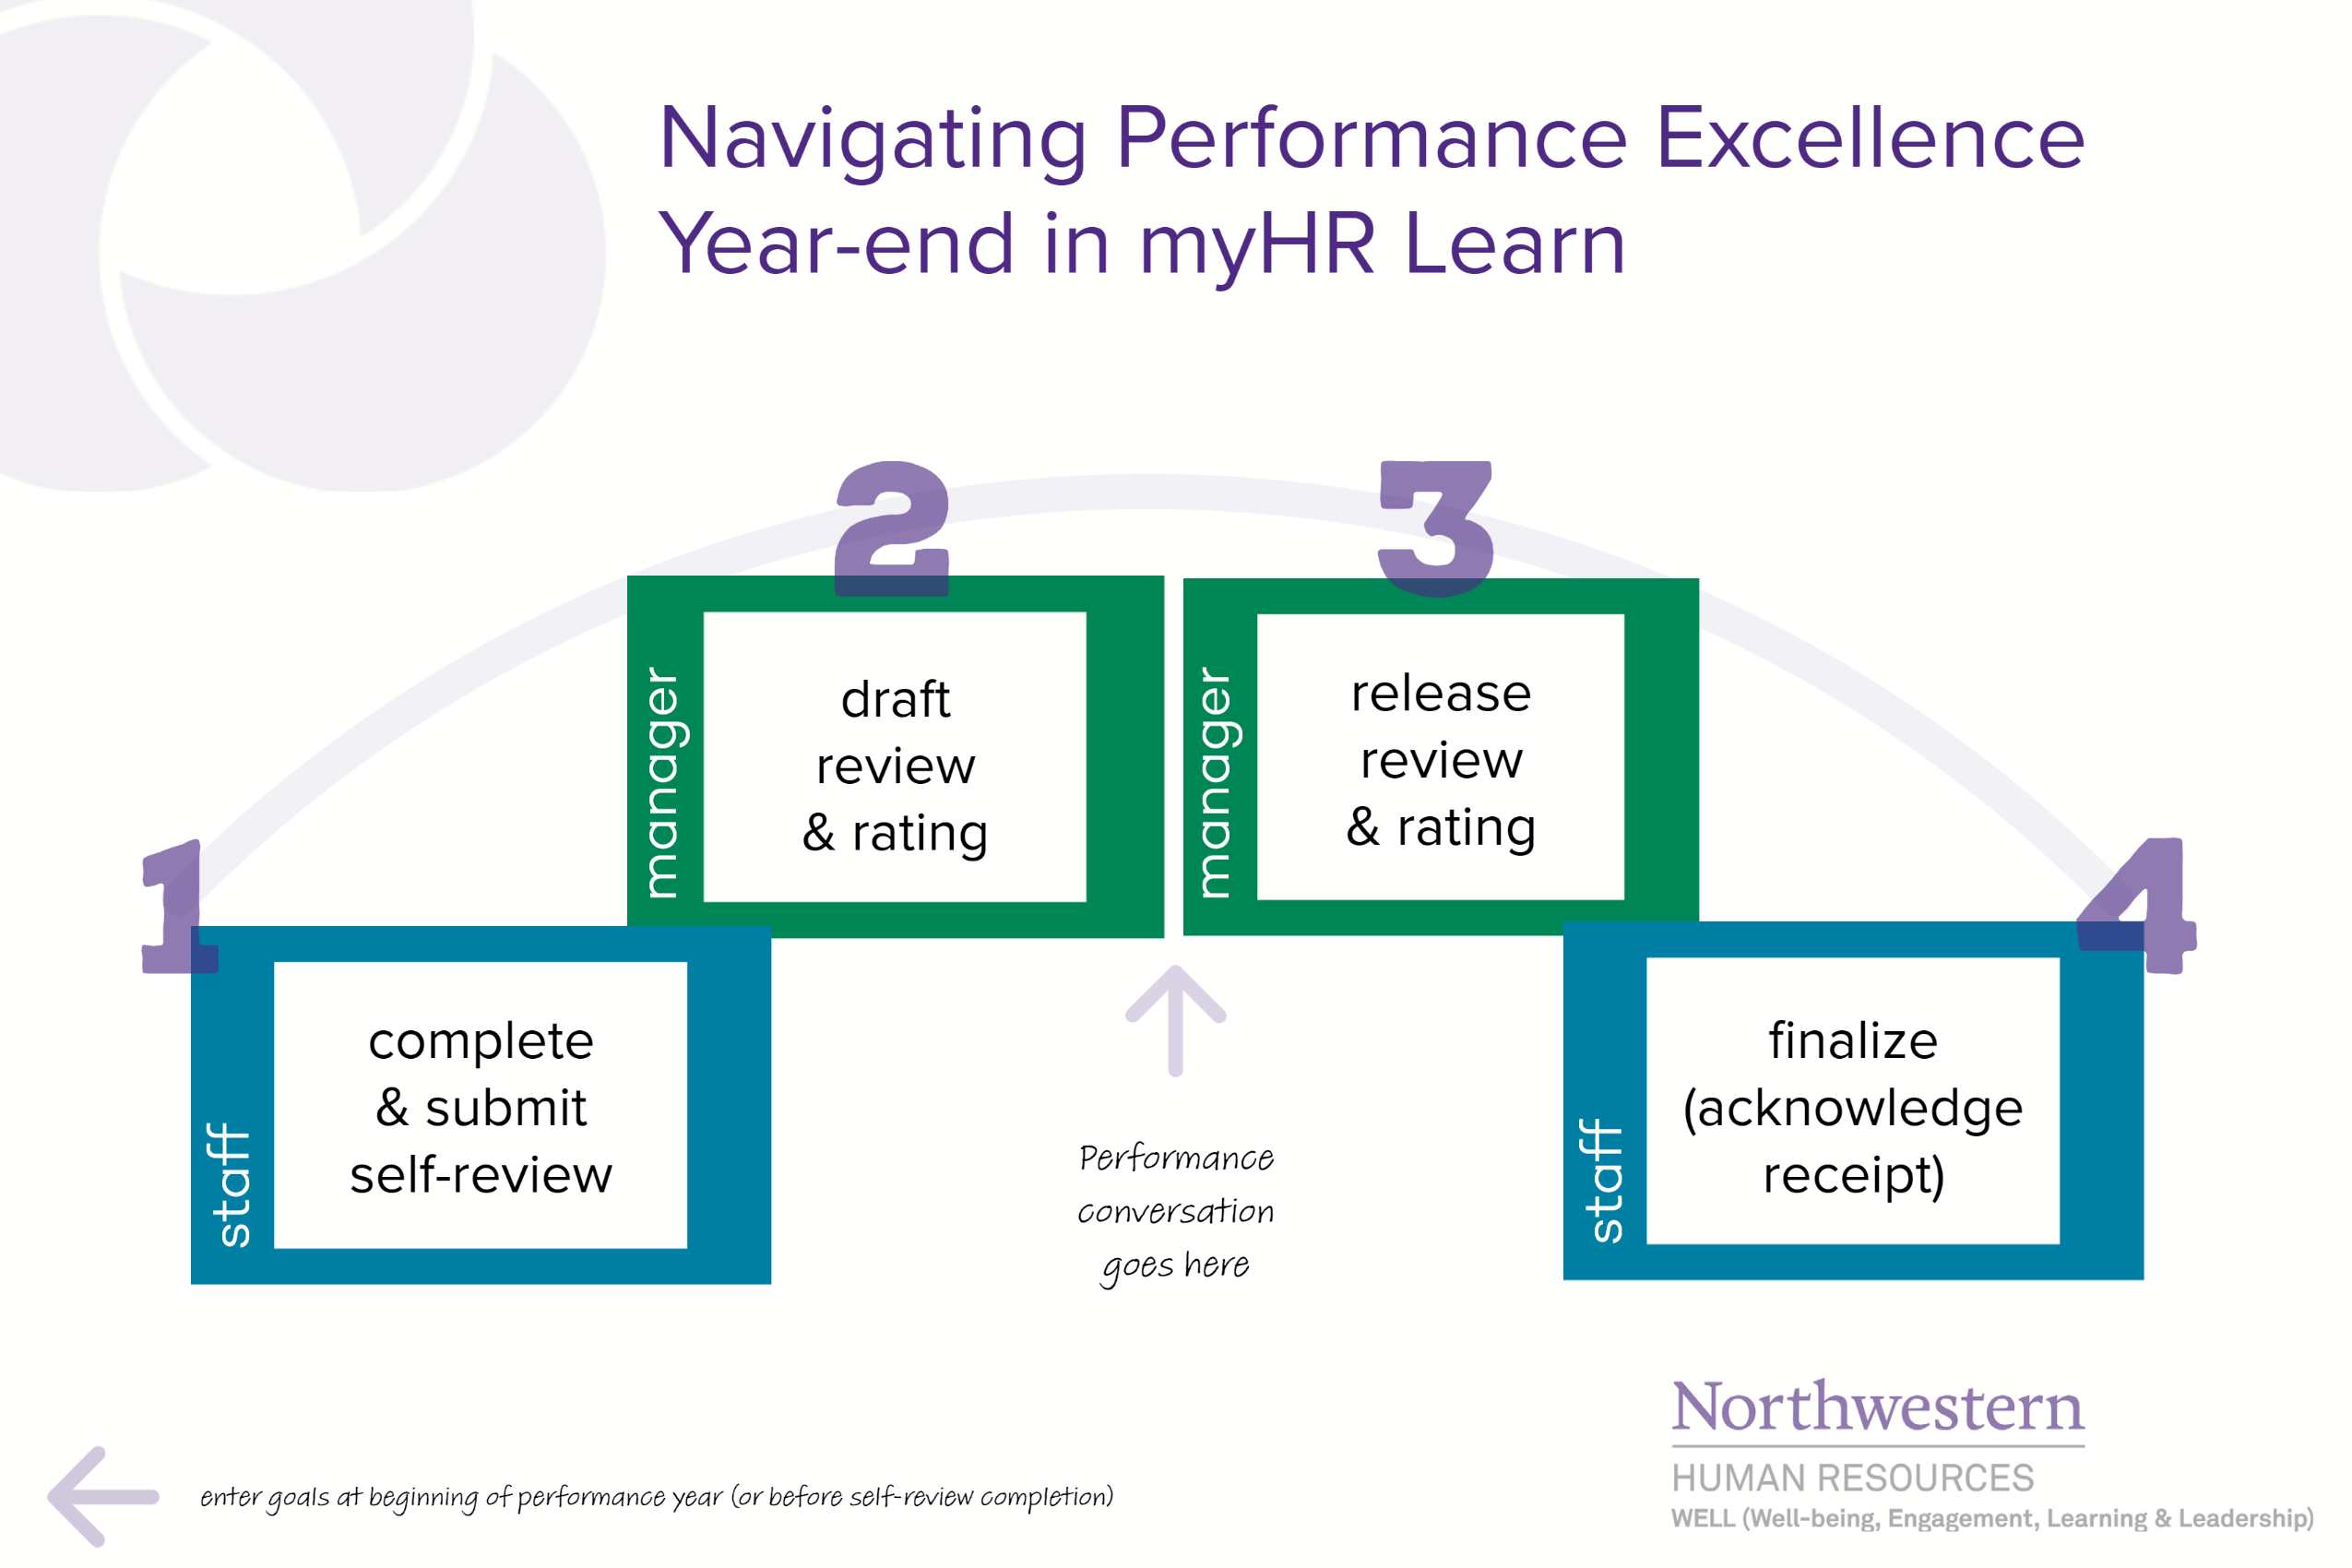 Navigating myHR Learn for year-end